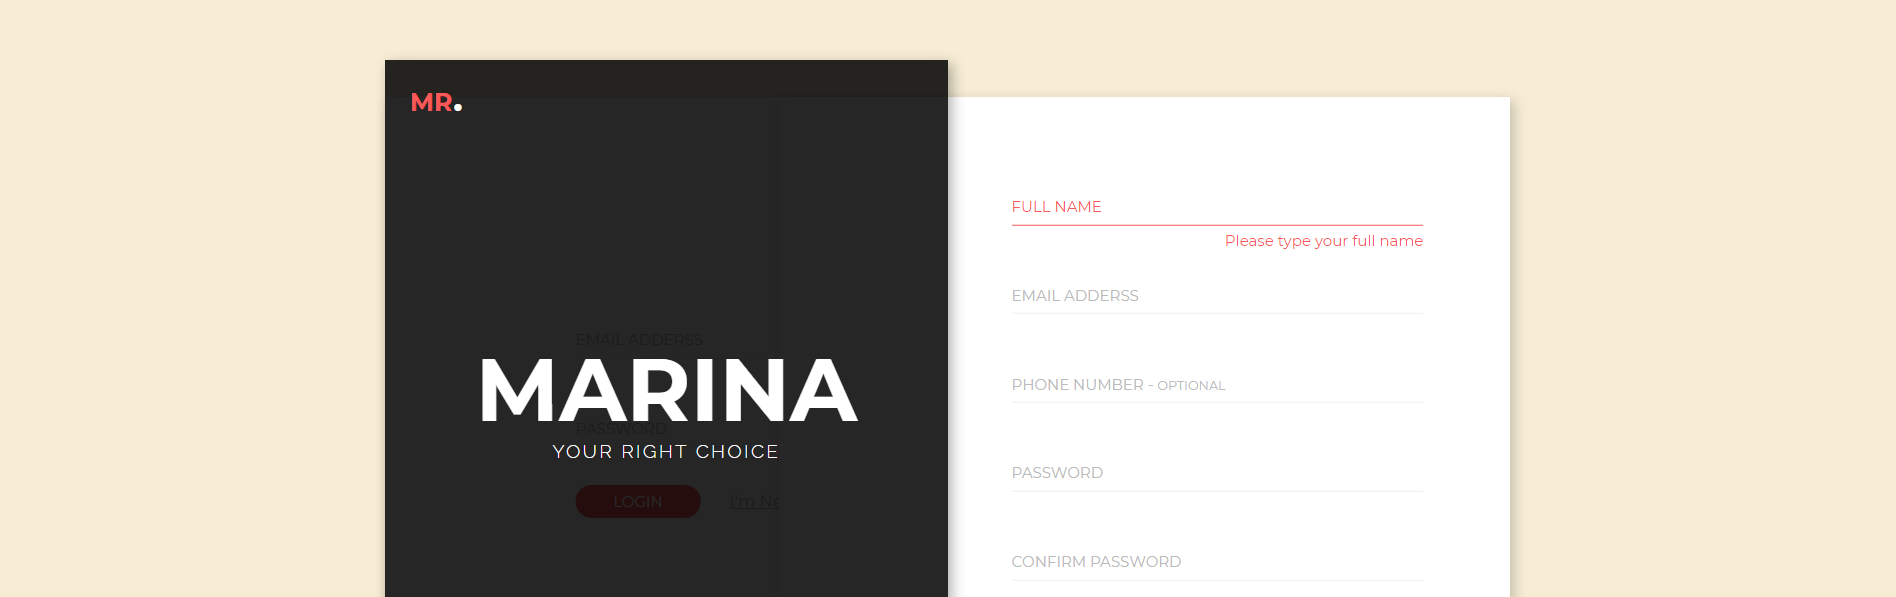 Responsive Signup and Login Form